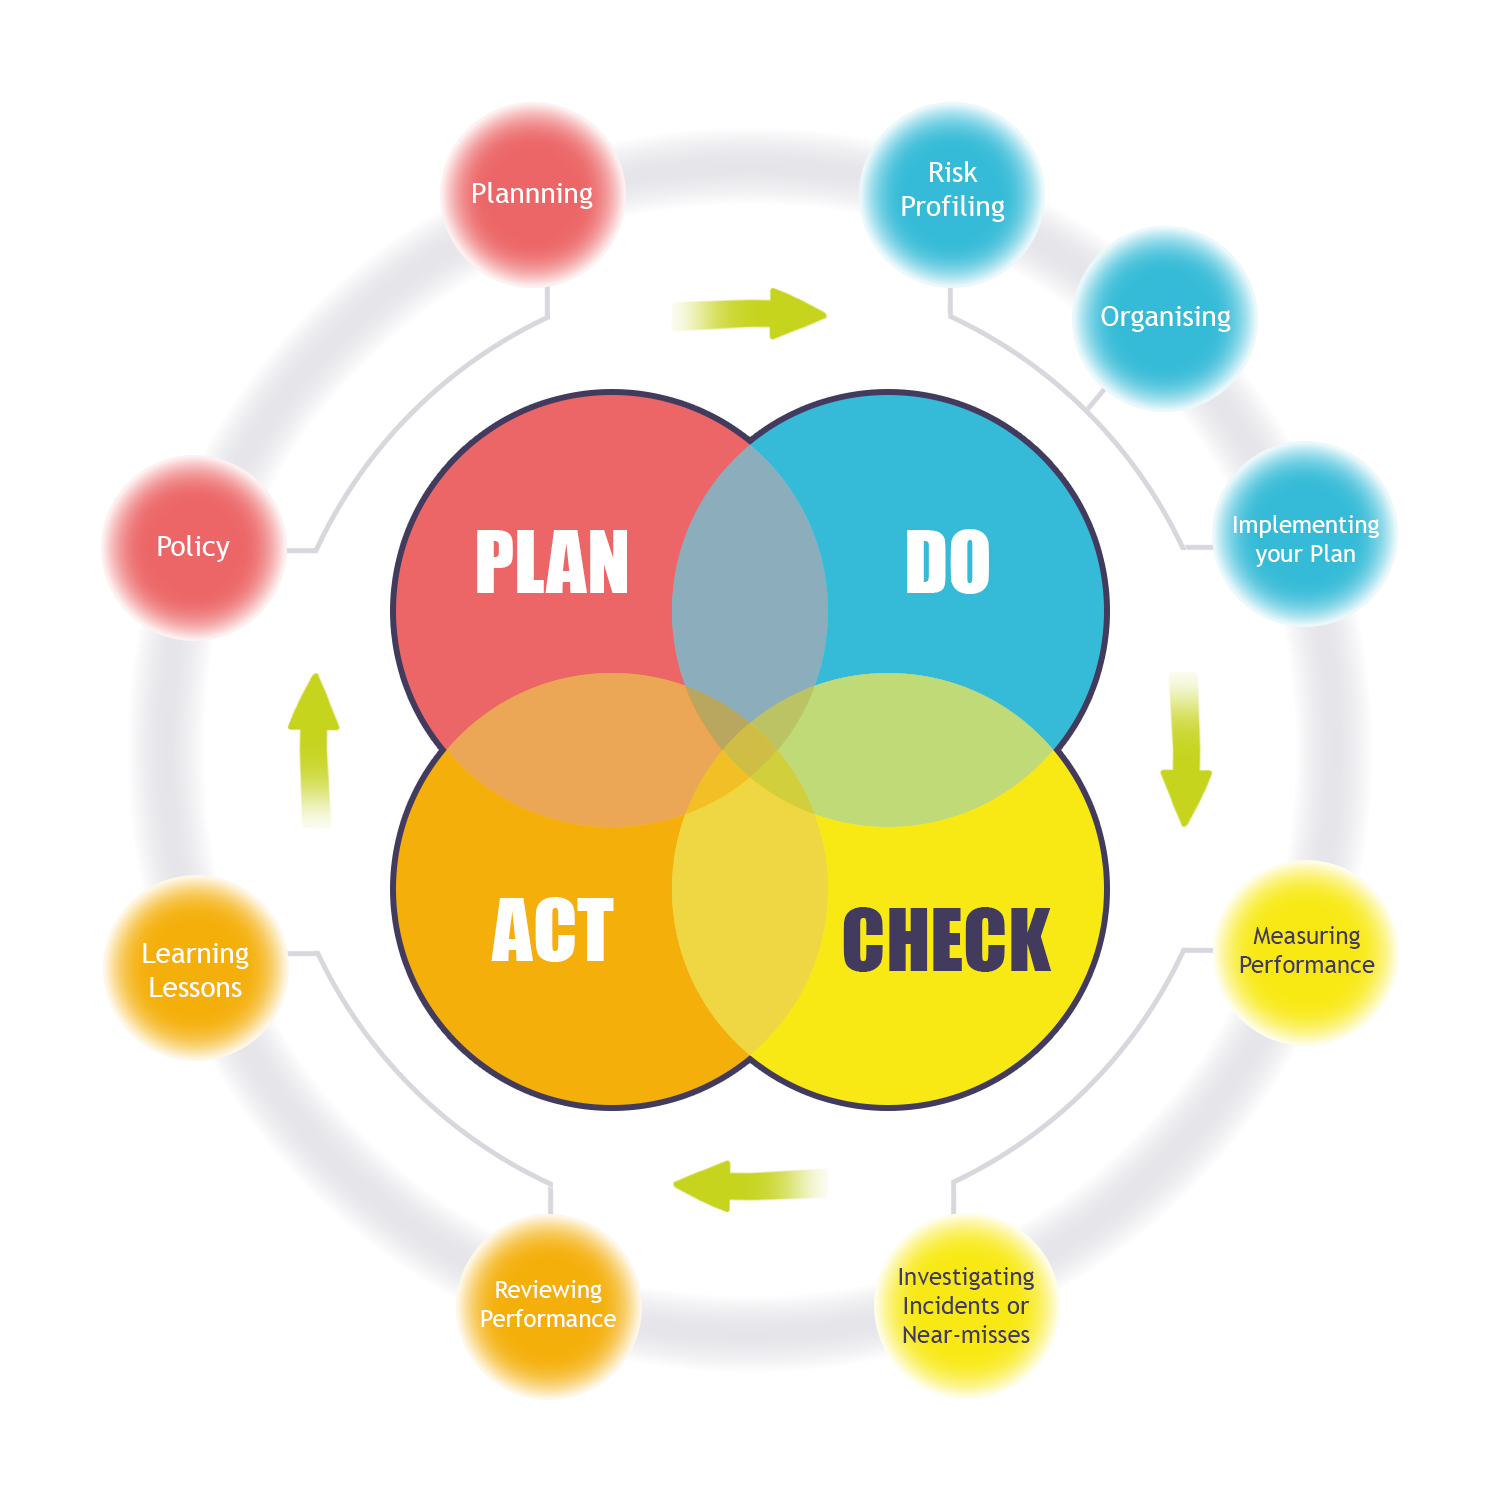 How does BCarm support Plan-Do-Check-Act (PDCA)?